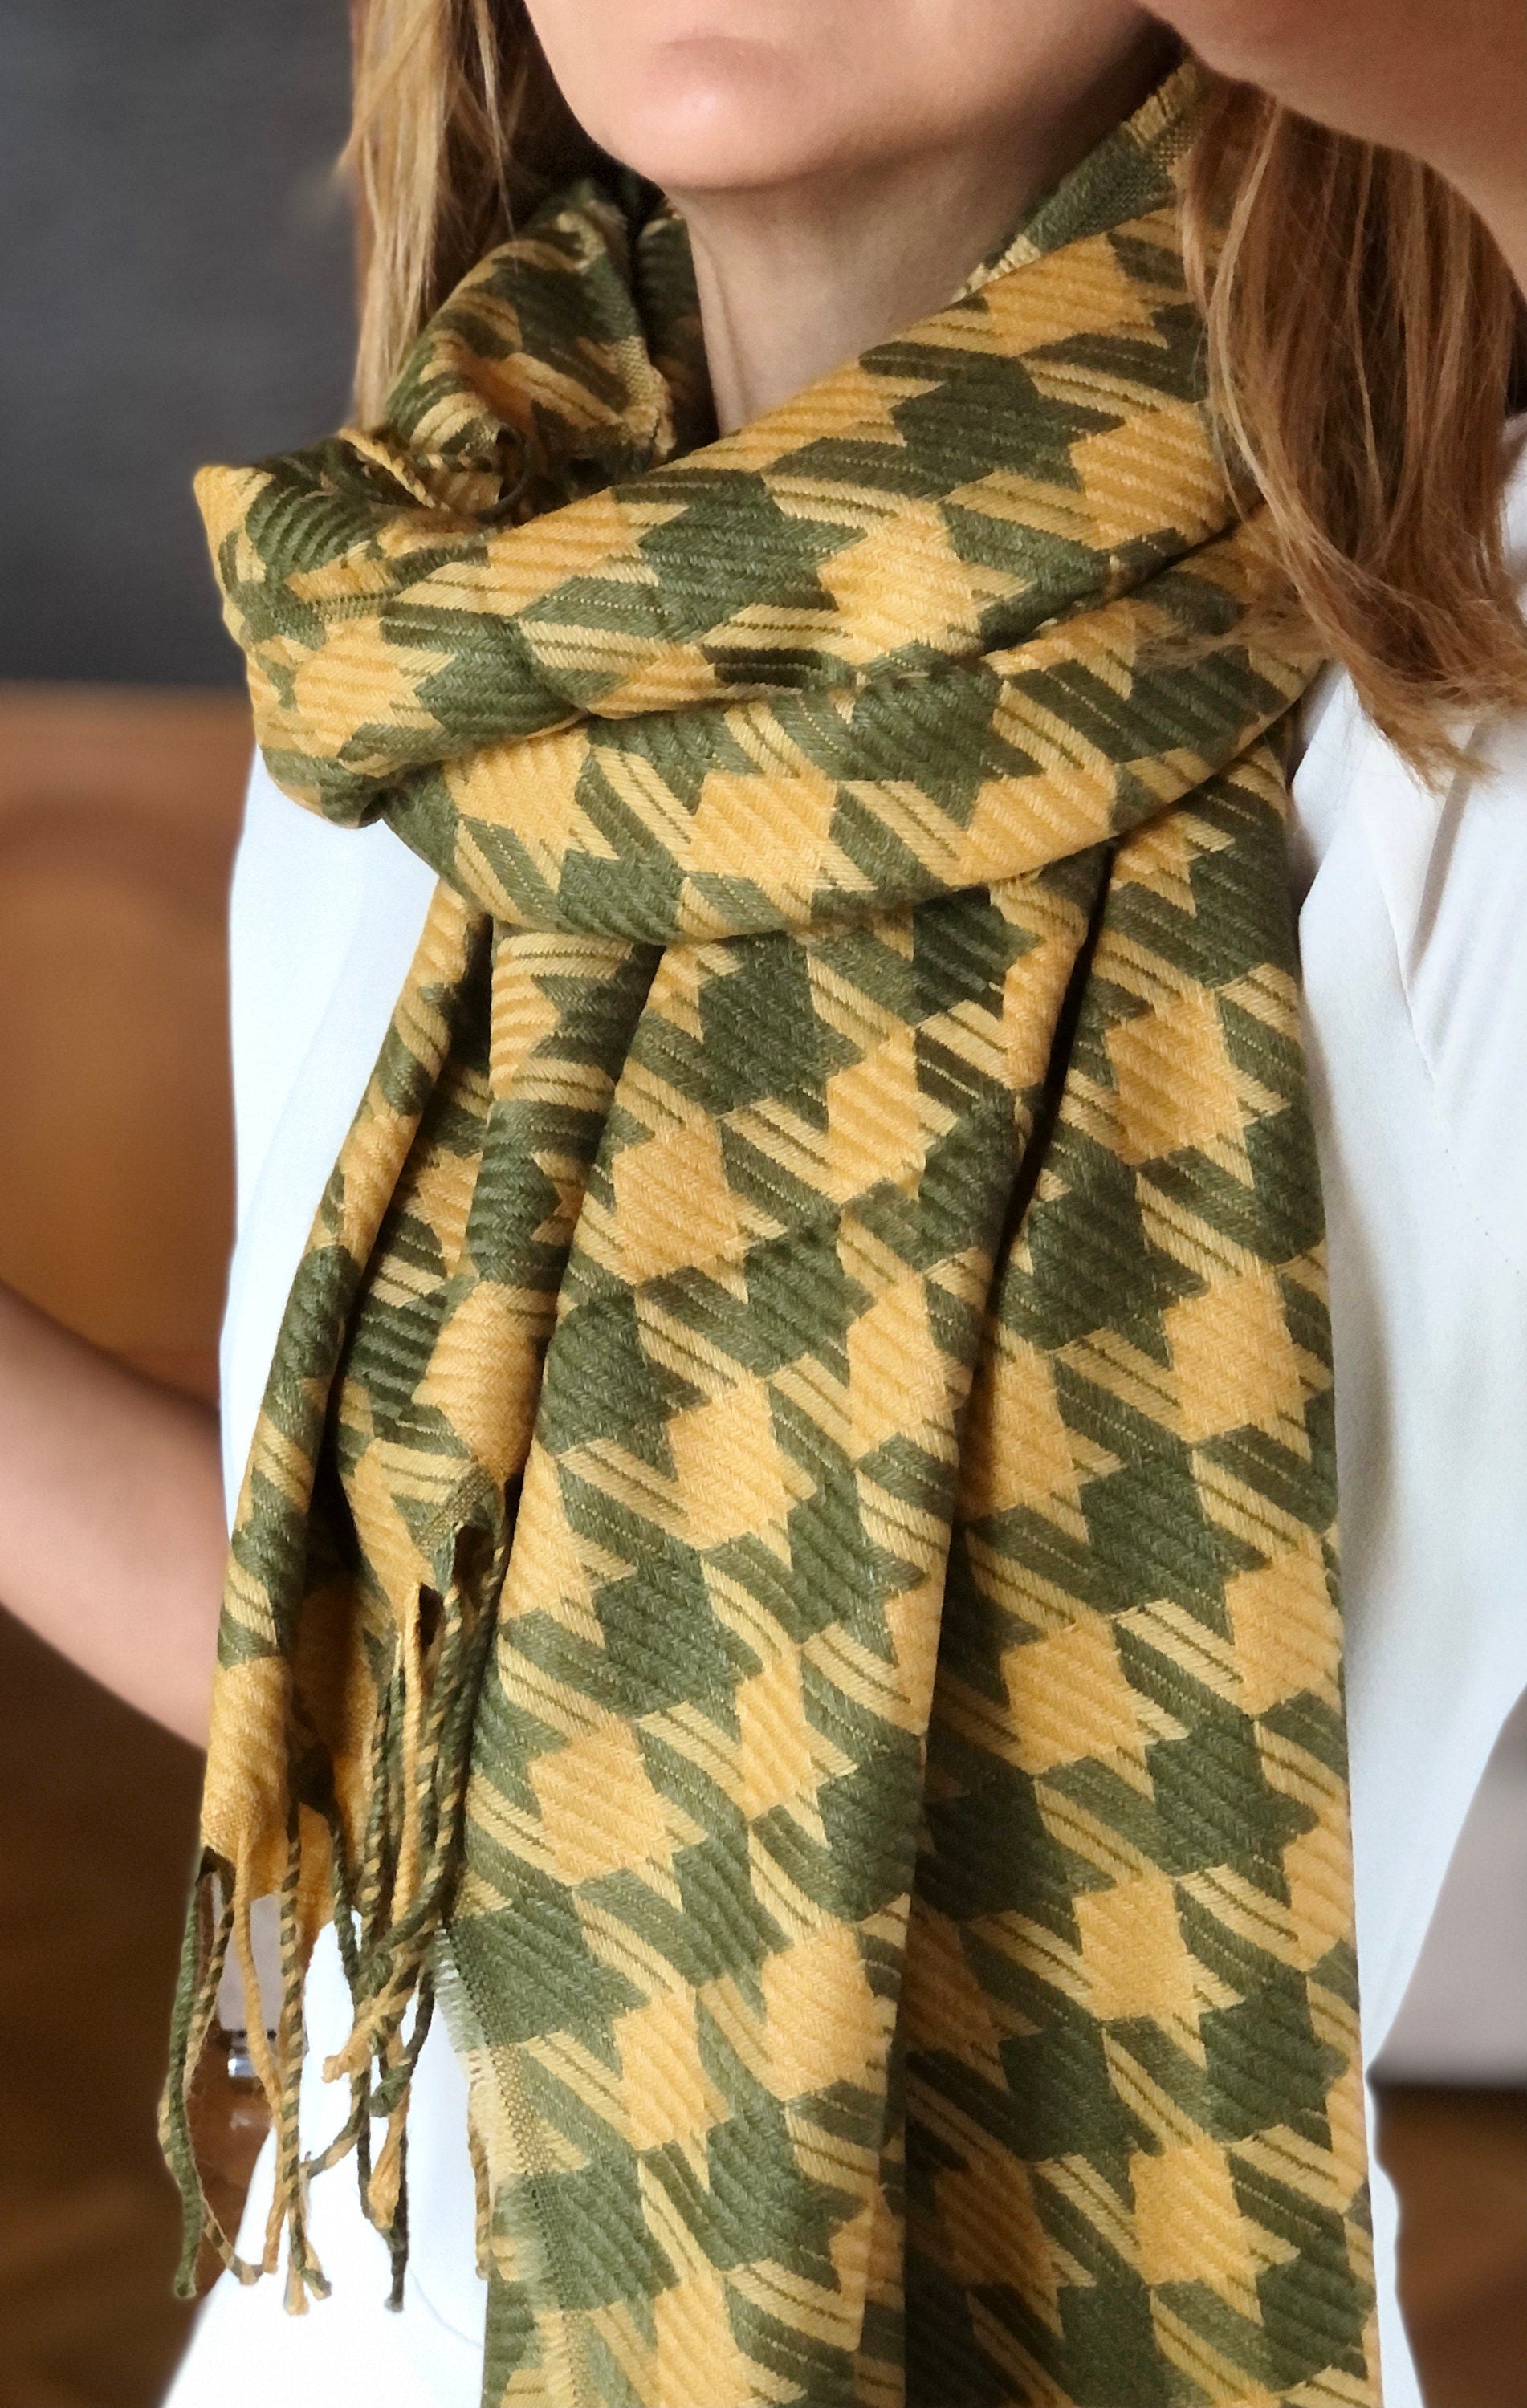 Add a pop of color to your outfit with this bright yellow khaki green shawl.